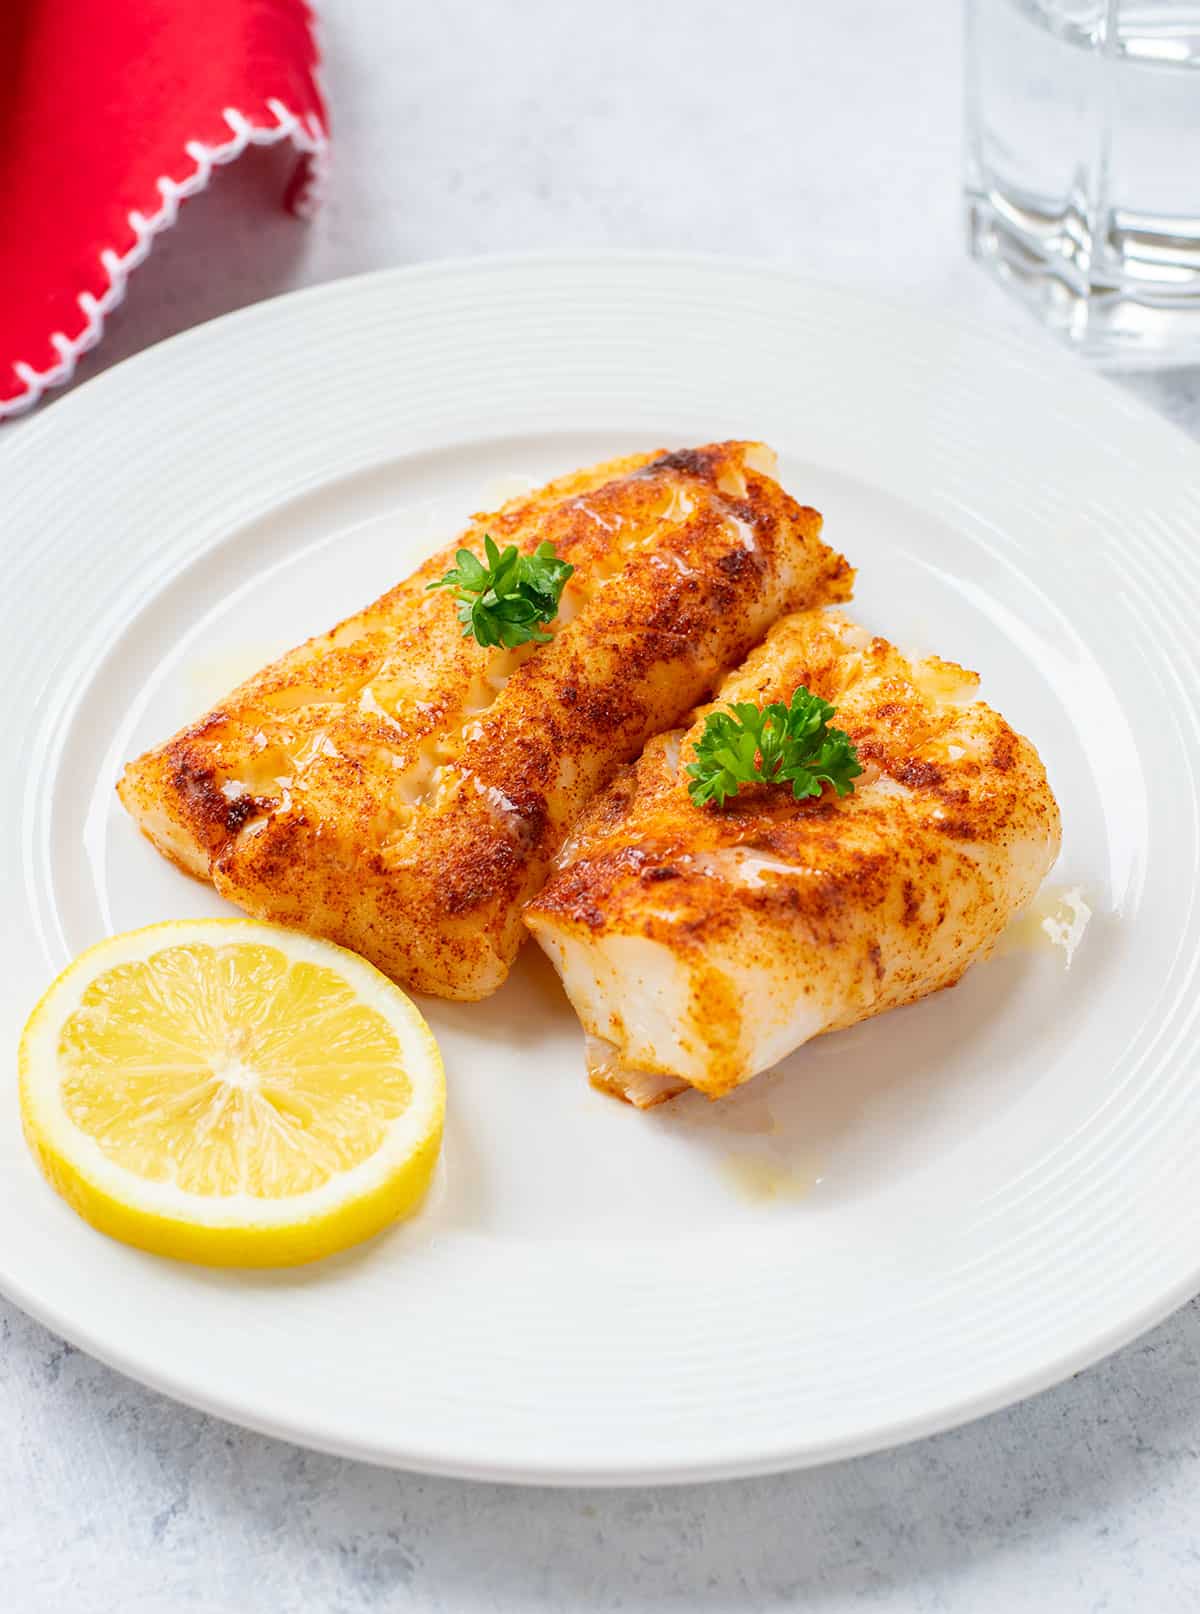 two pieces of grilled, seasoned cod on plate with lemon and parsley.